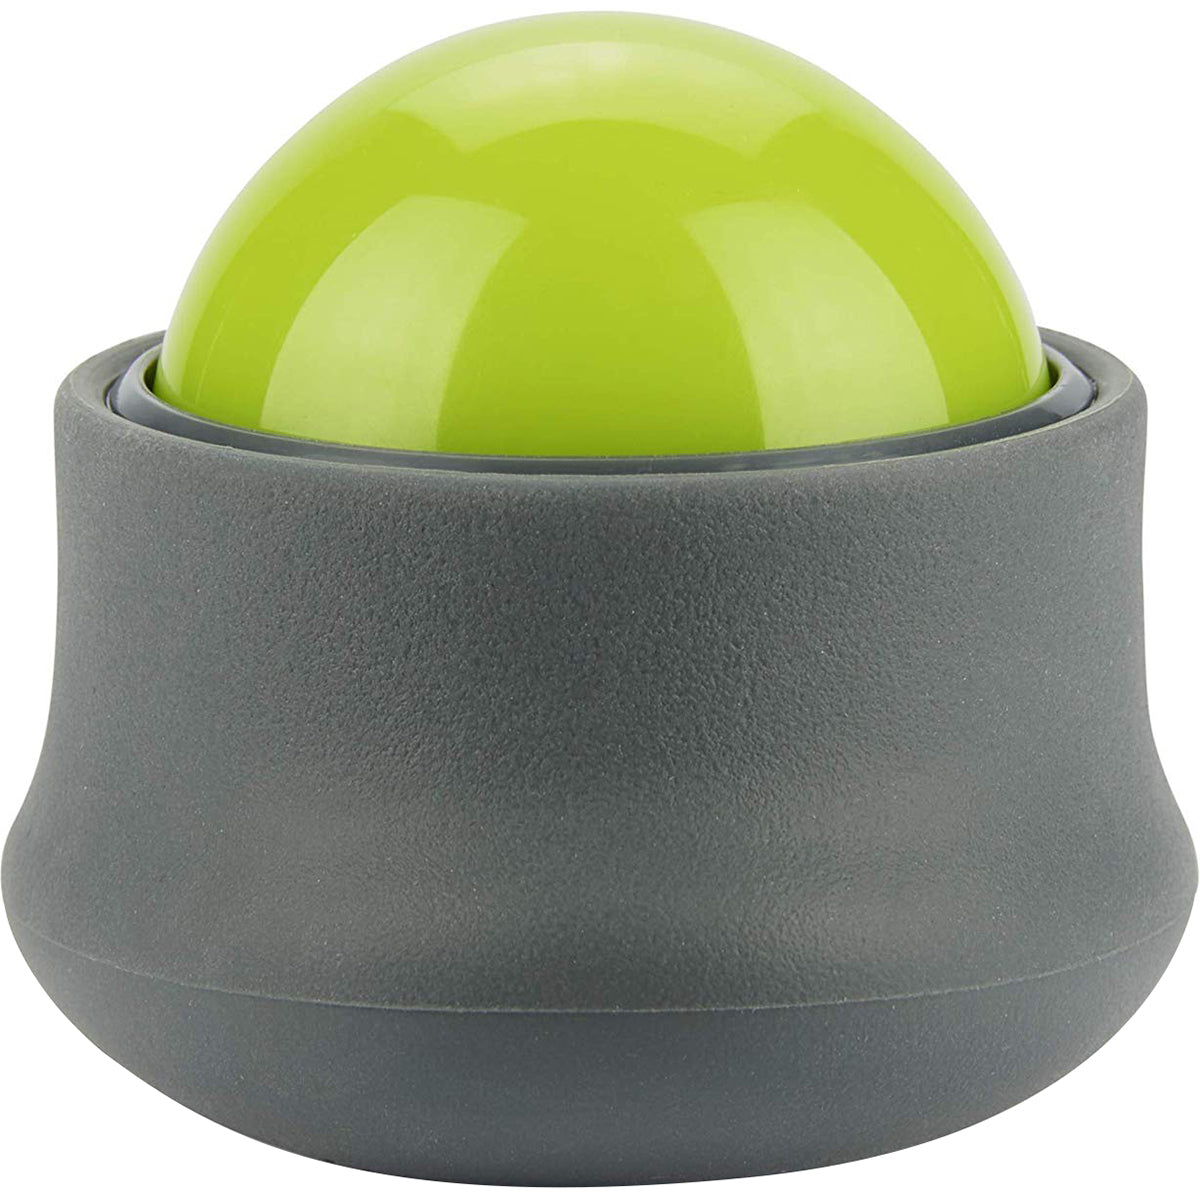 TriggerPoint Handheld Massage Ball - Gray/Lime TriggerPoint